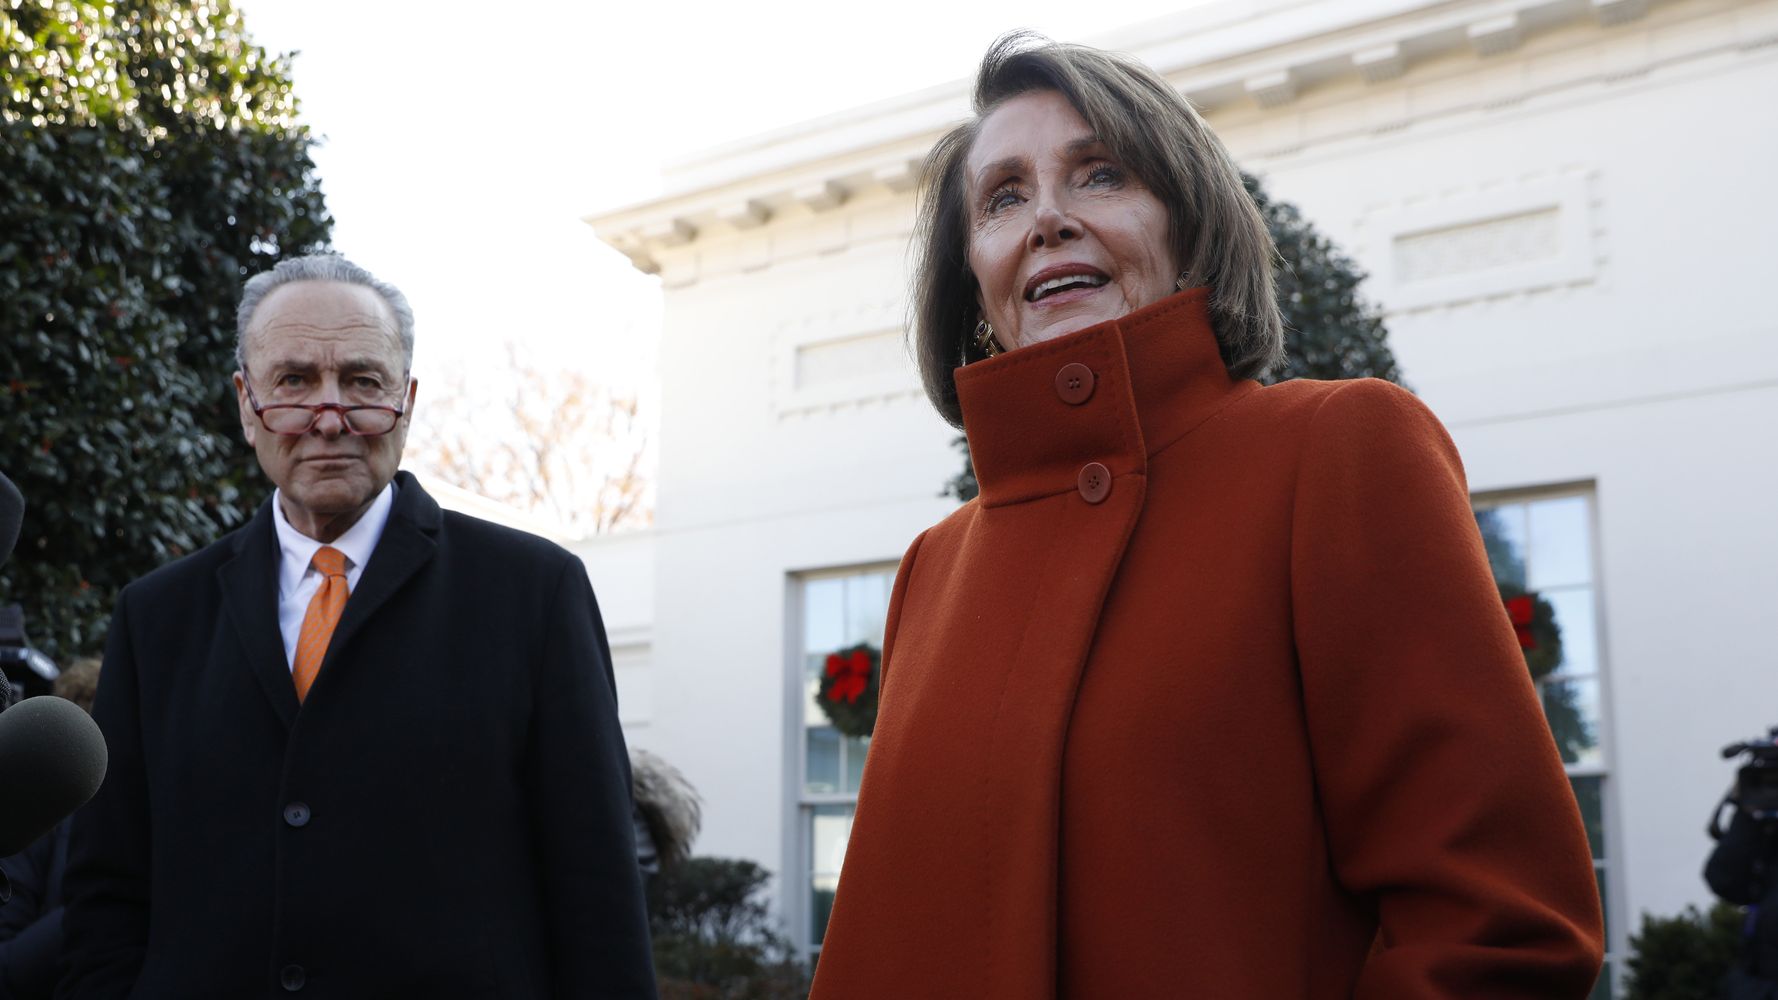 Nancy Pelosi's Red Coat Was The Subtlest Power Move | HuffPost Life